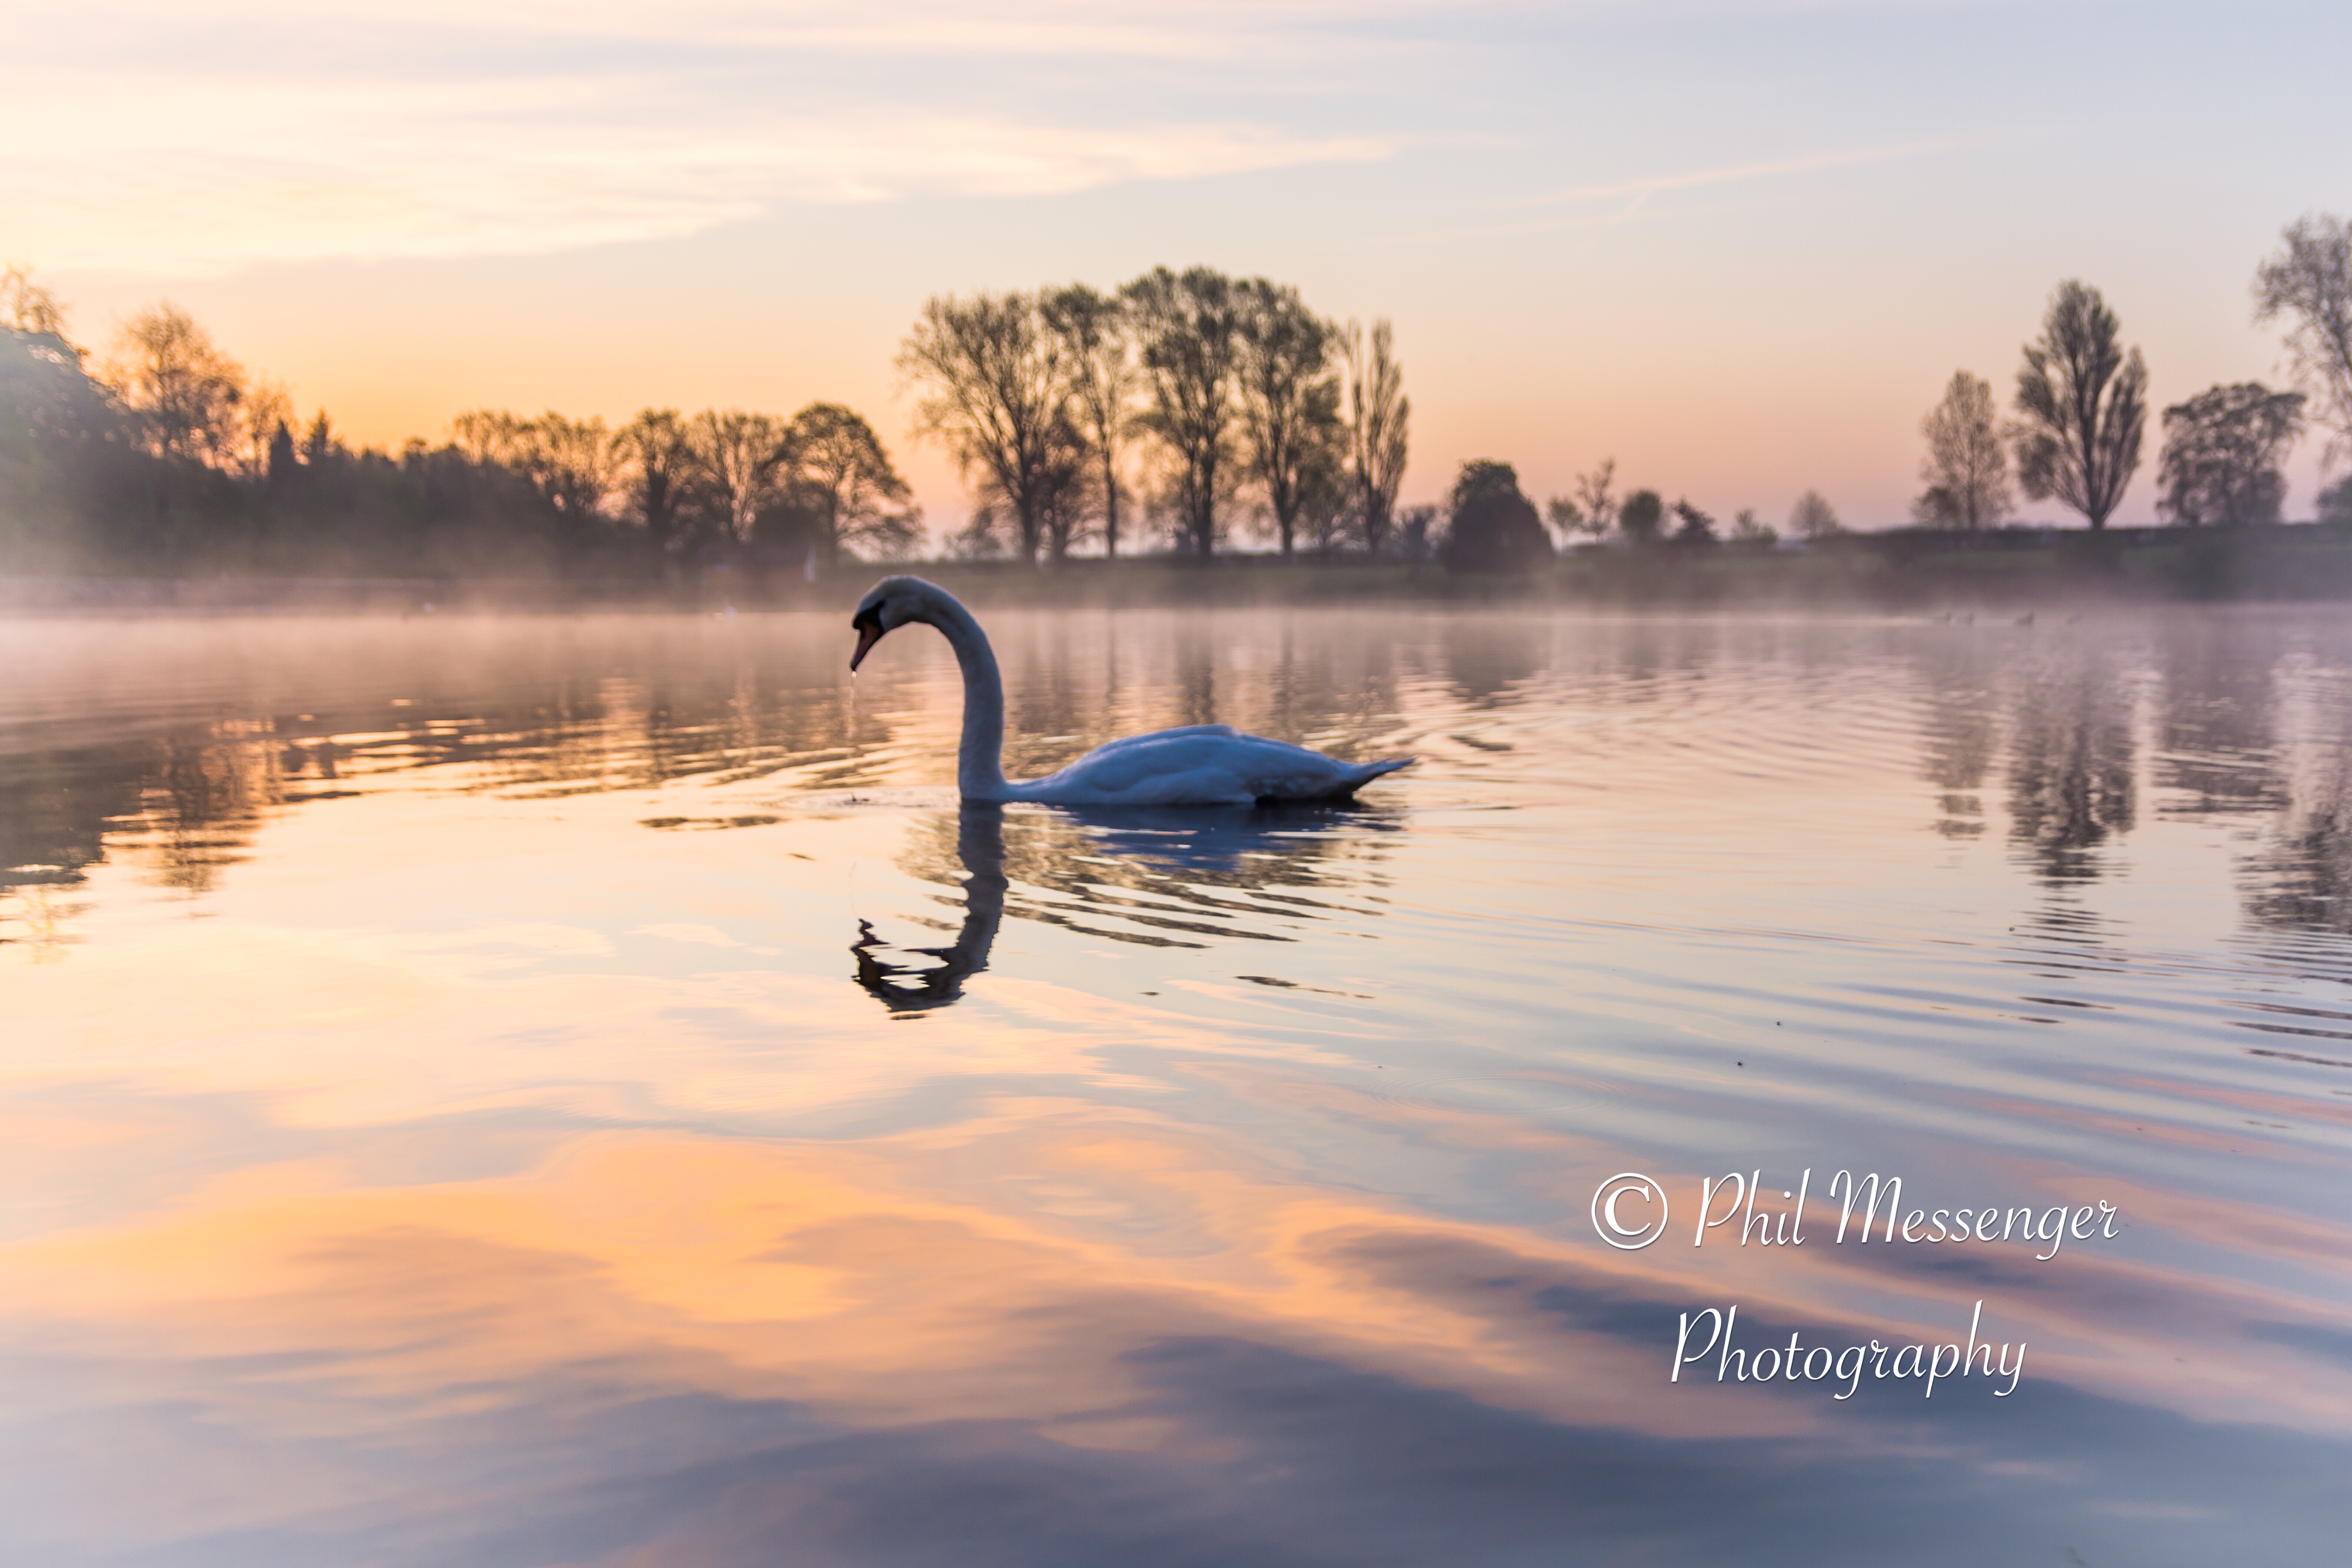 Mute swan displaying grace and beauty on a calm misty lake